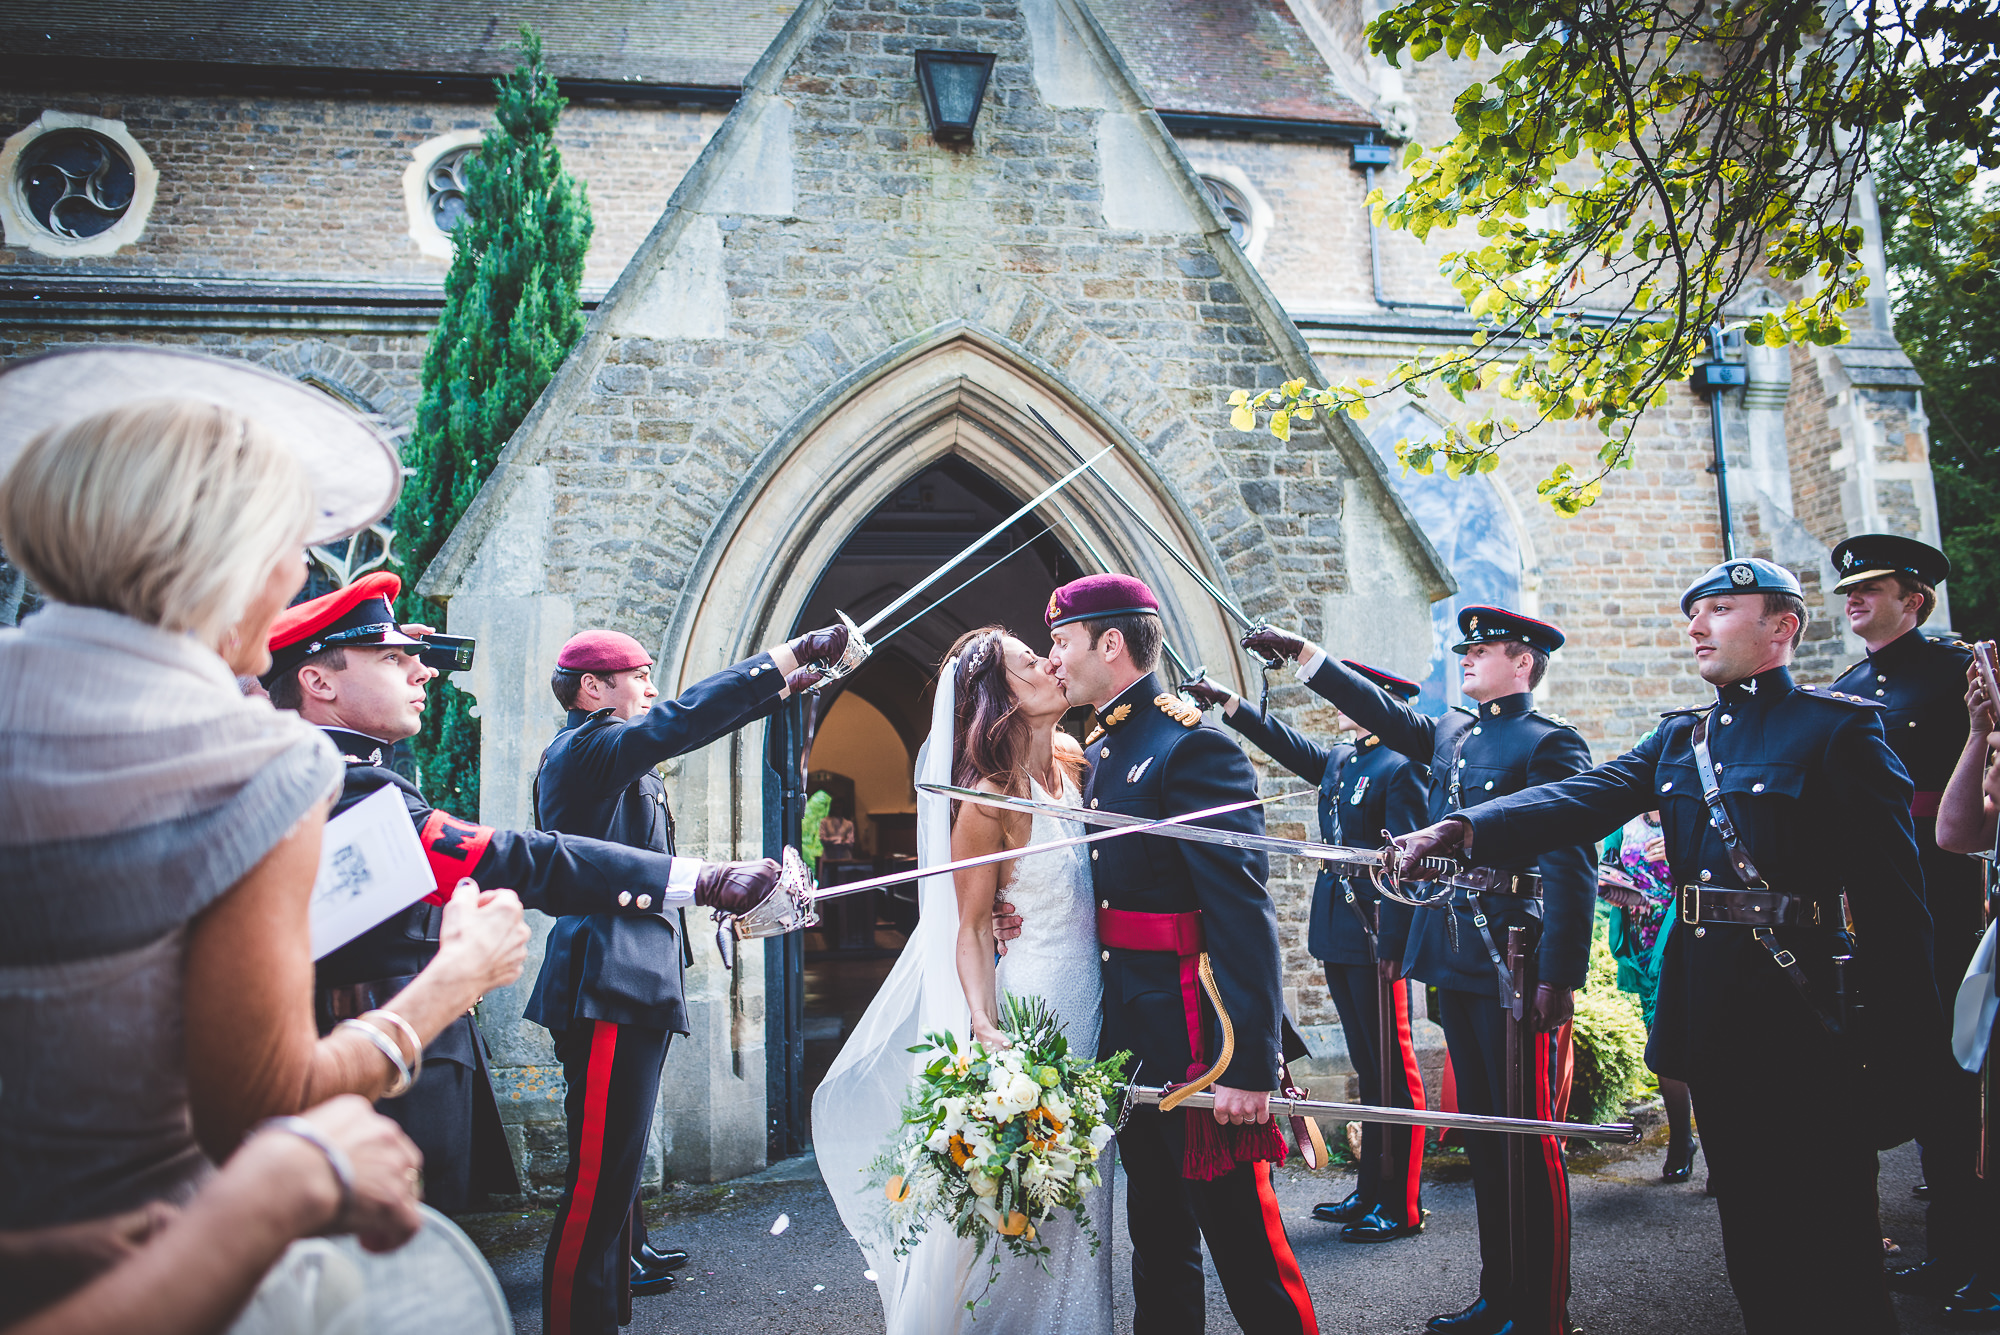 A wedding photo capturing a bride and groom kissing in front of the church.